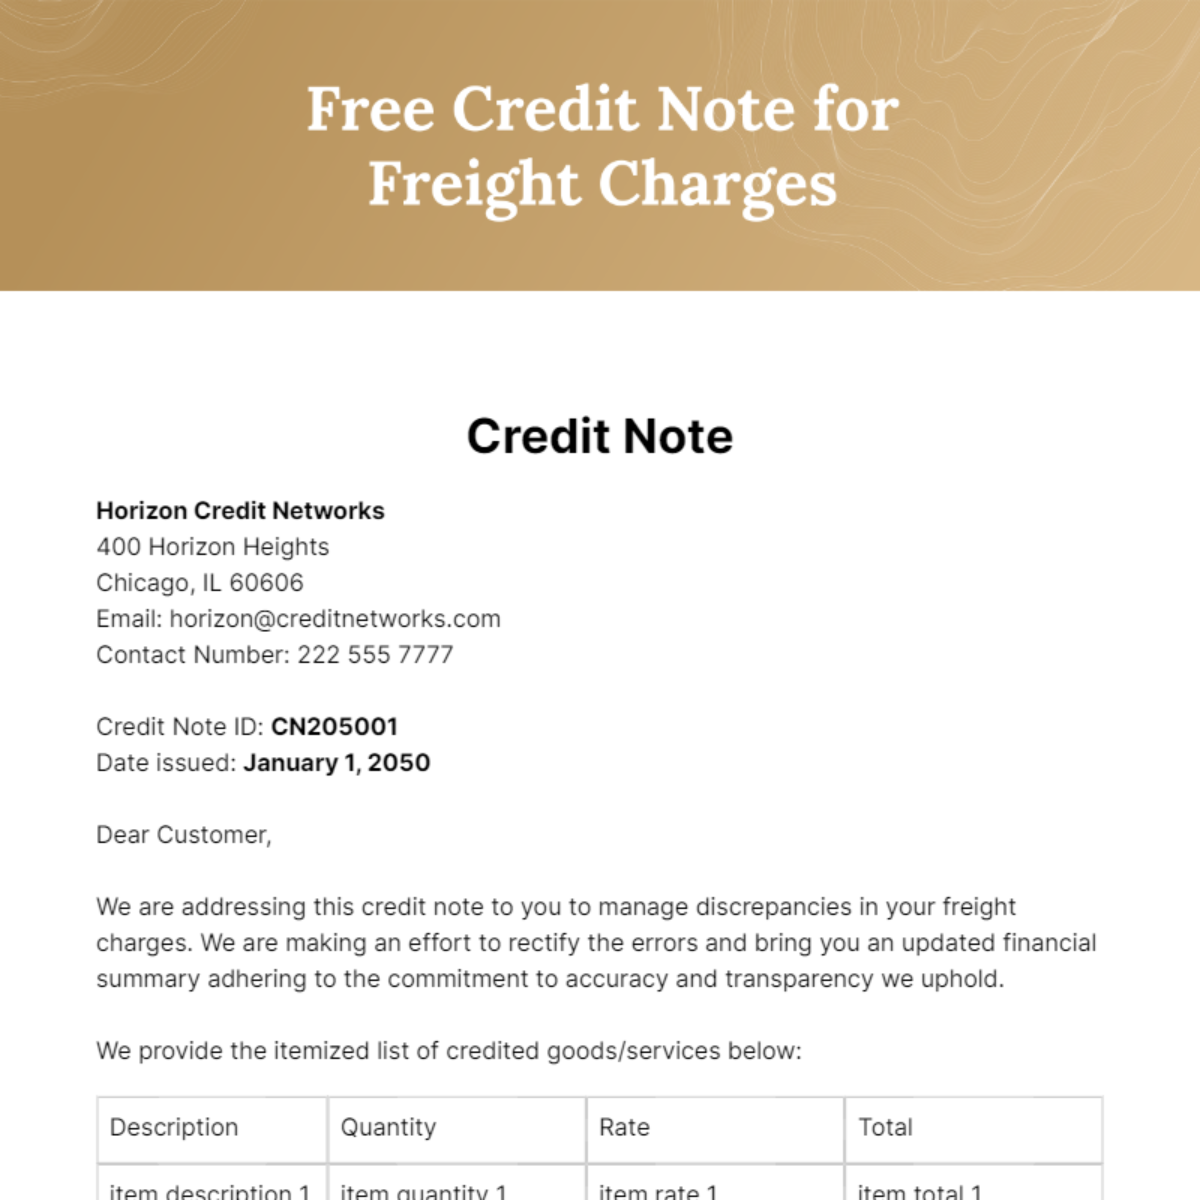 Credit Note for Freight Charges Template